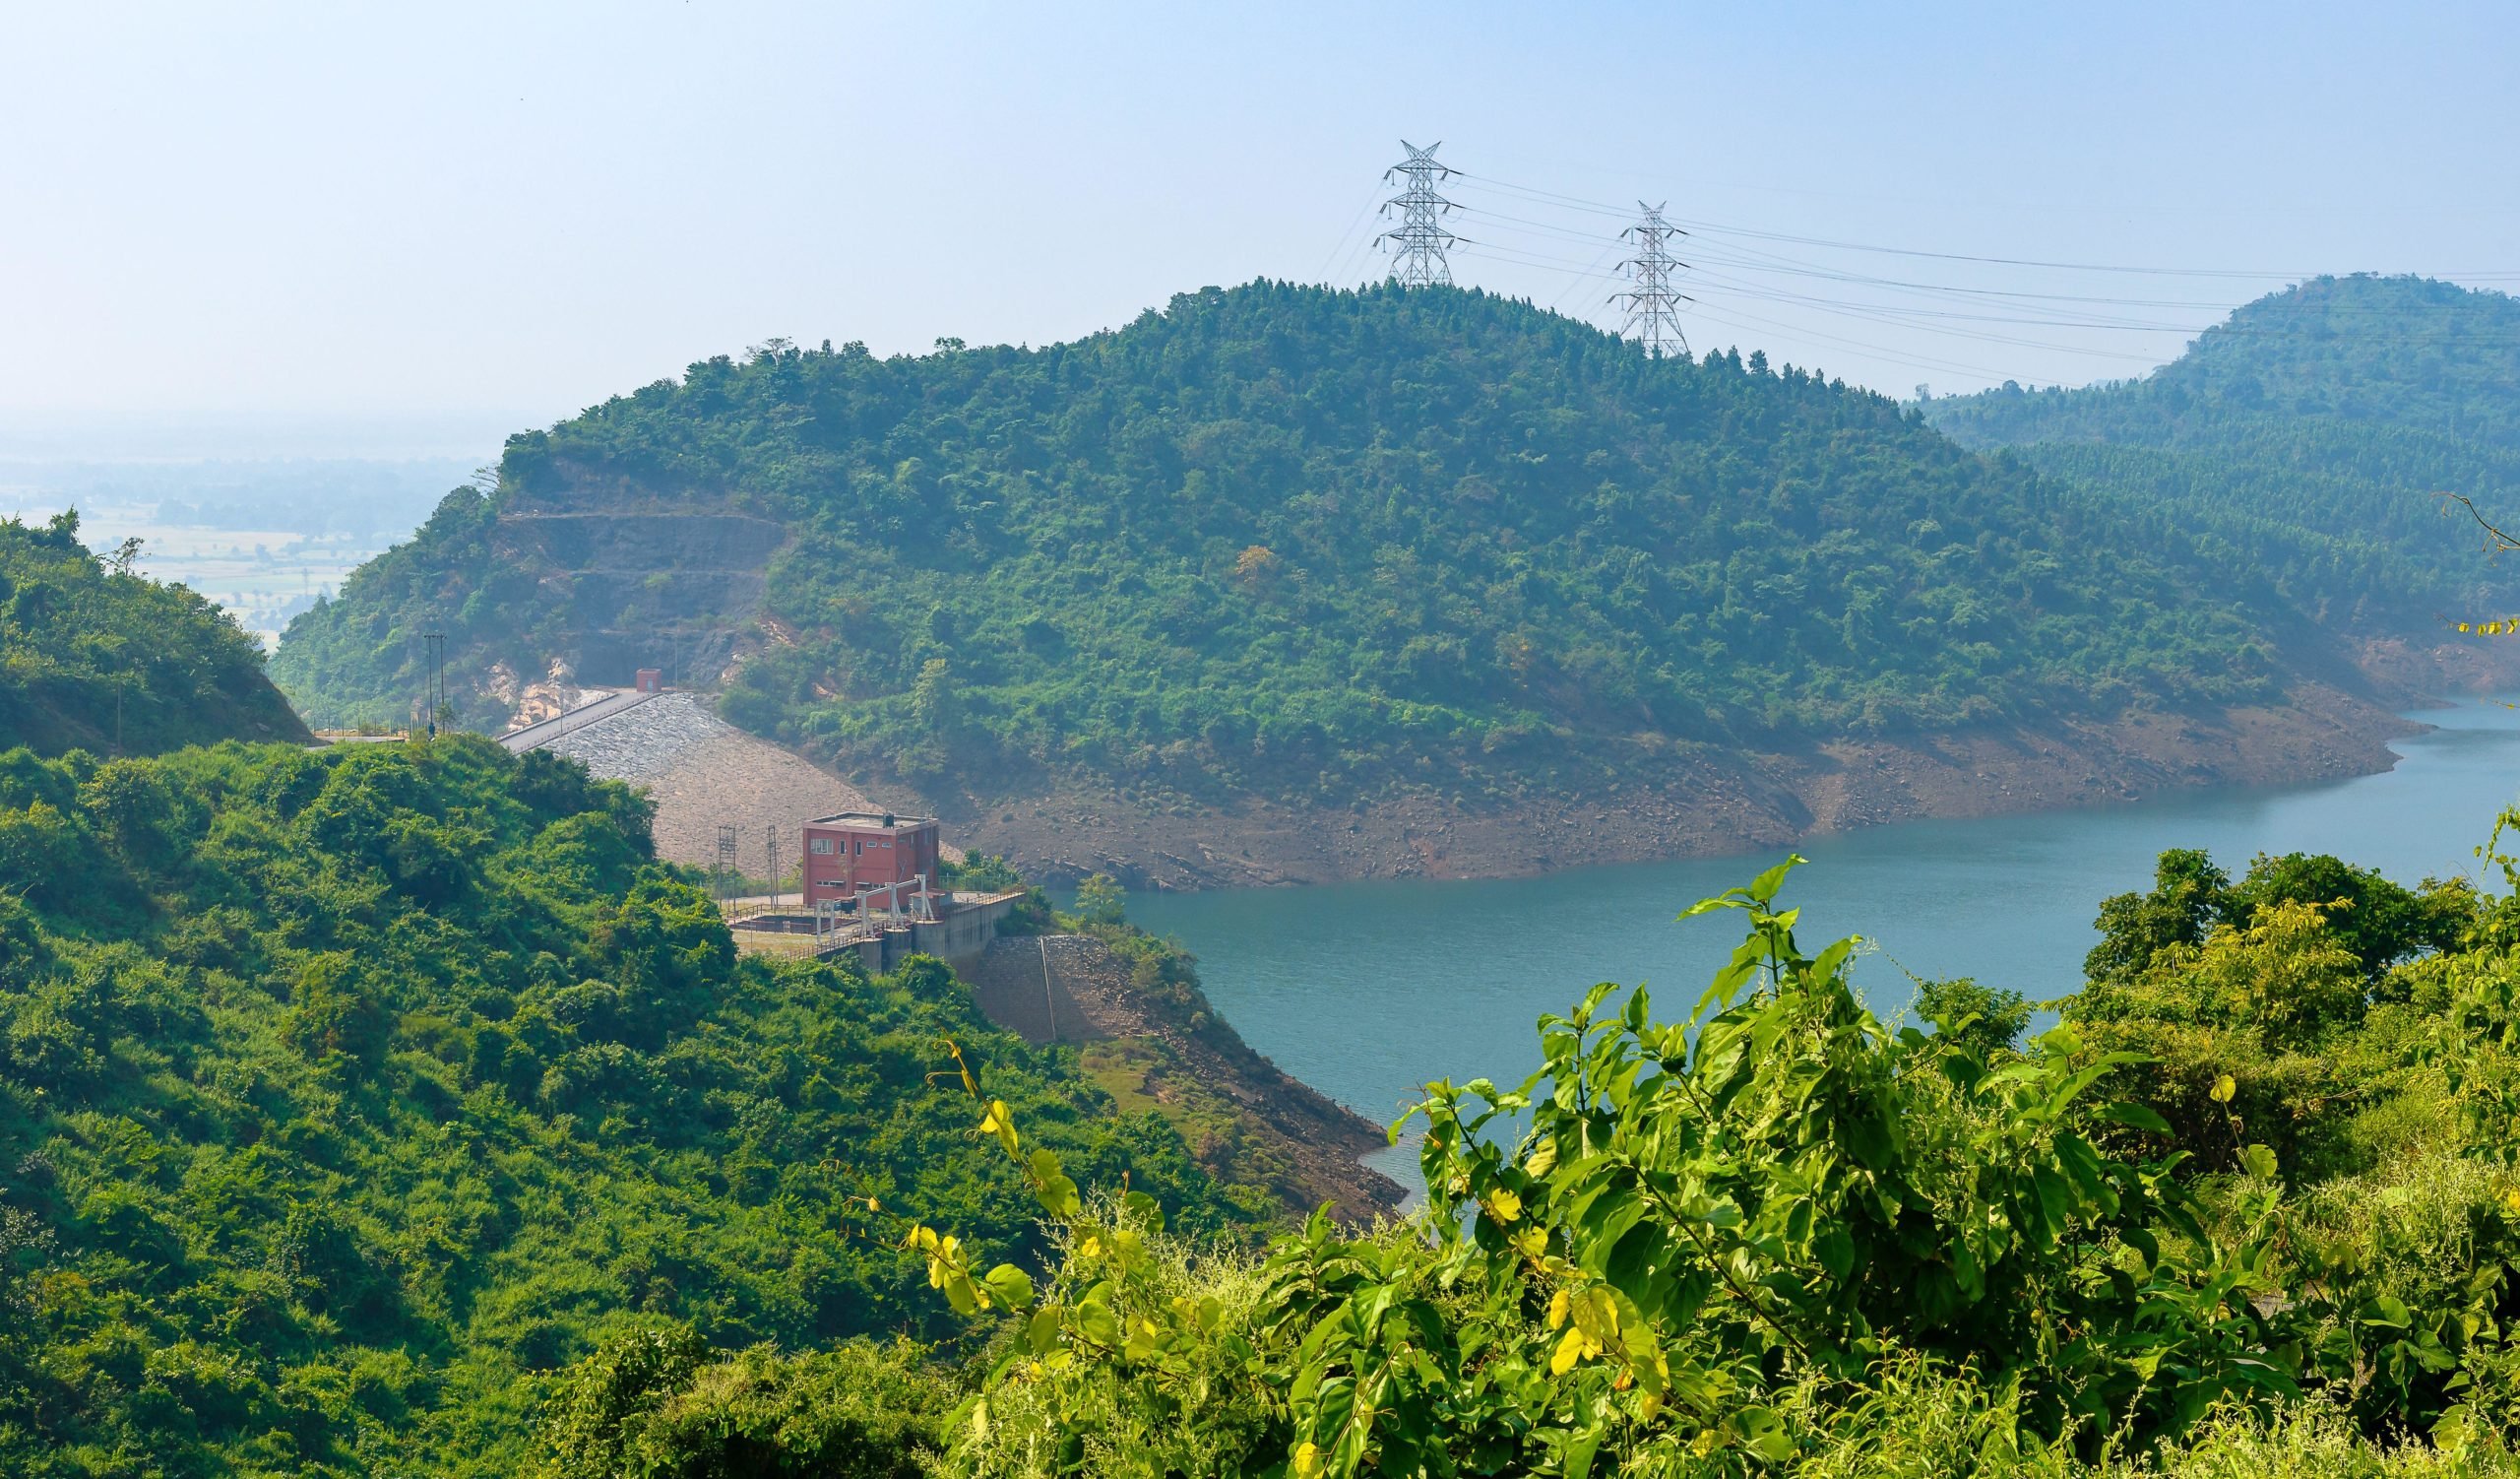 <p>In 2007, the Purulia Pumped Storage Project was completed in Purulia, West Bengal, causing the flooding of 442 hectares of land on which the livelihoods of local communities depended. Now, a similar pumped hydro project – the Turga Pumped Storage Project – has been approved nearby, which local communities have vowed to oppose. (Image: Abir Roy Barman / Alamy)</p>